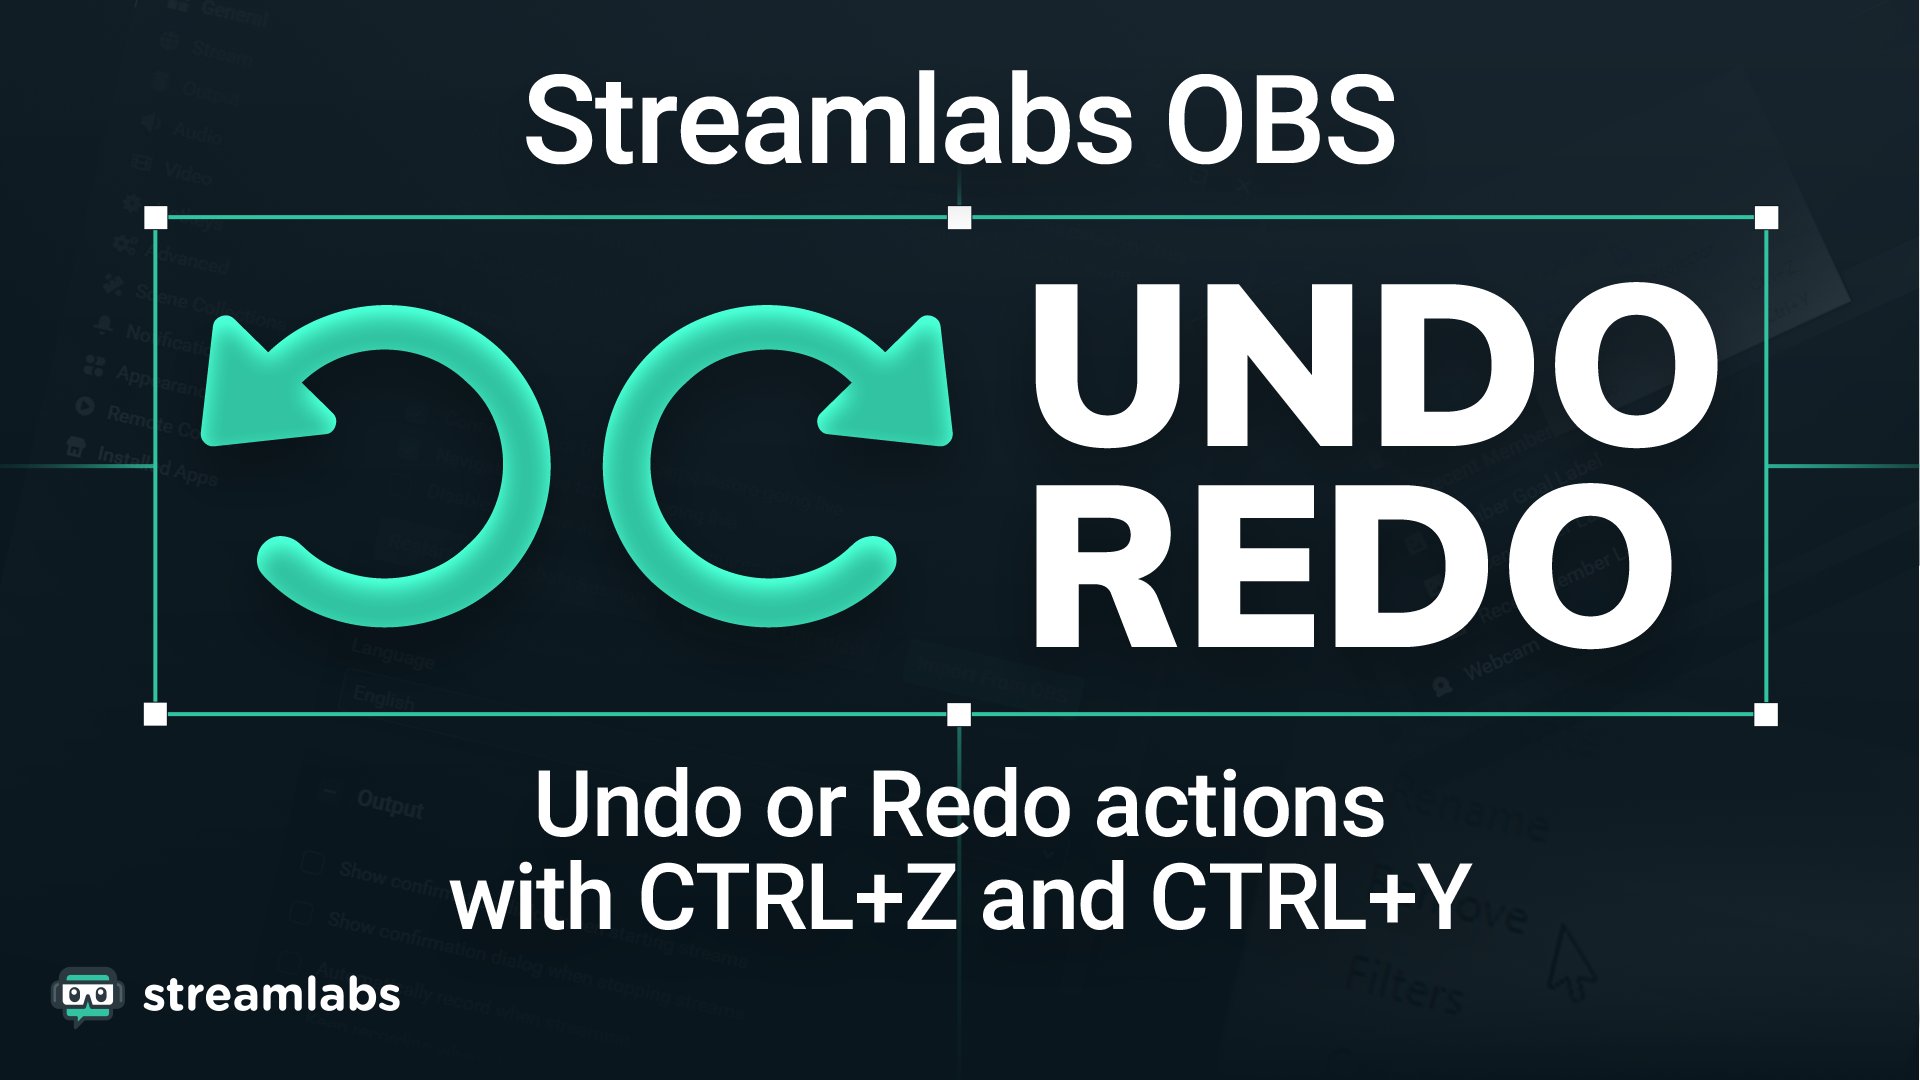 Streamlabs Auf Twitter Don T Forget Streamlabs Obs Has Undo Redo Functionality Go Forth And Make Mistakes